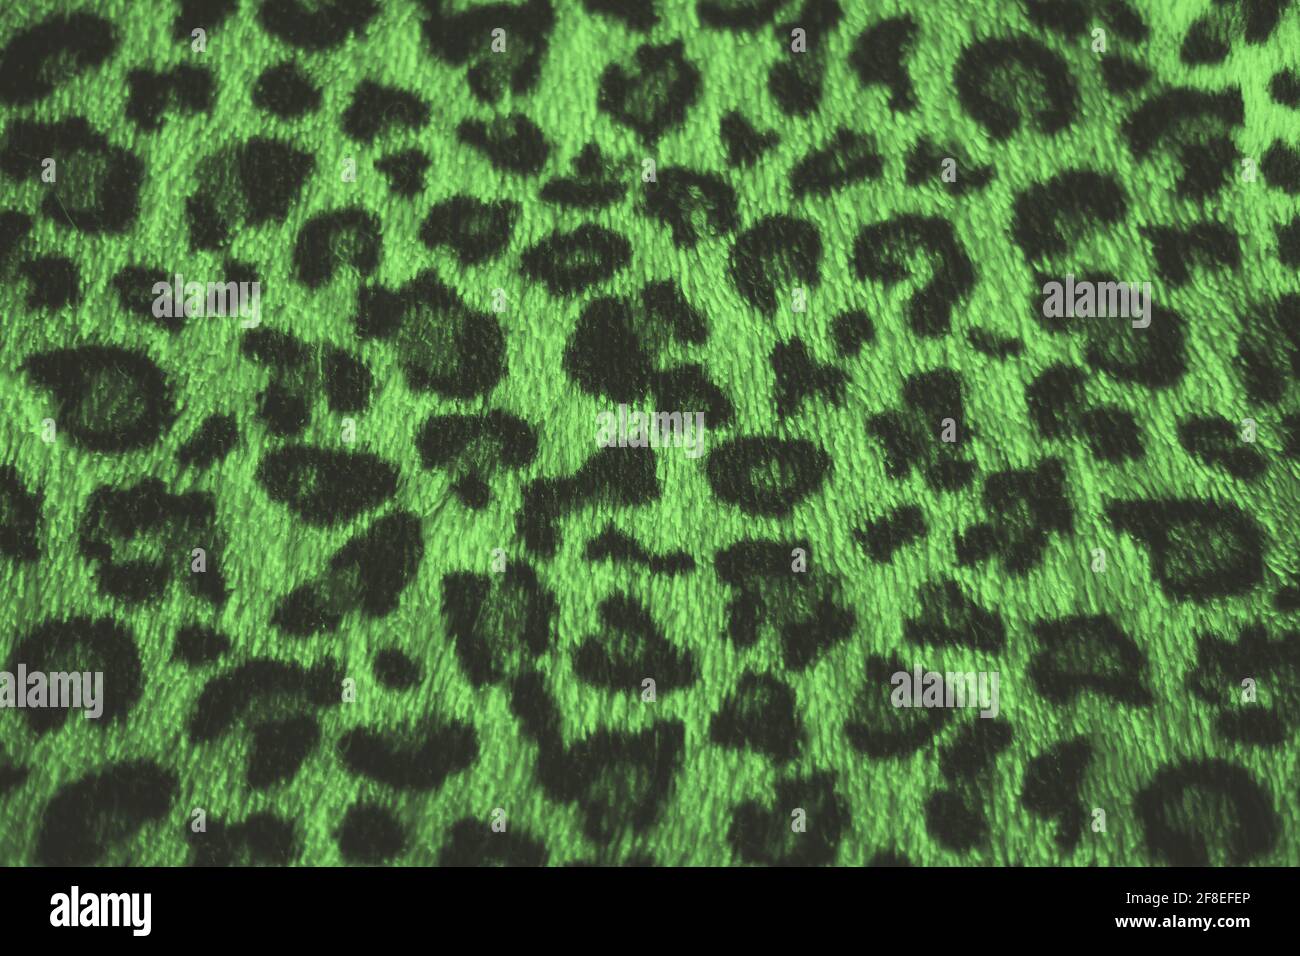 Green Leopard Fur Texture Stock Photo, Picture and Royalty Free